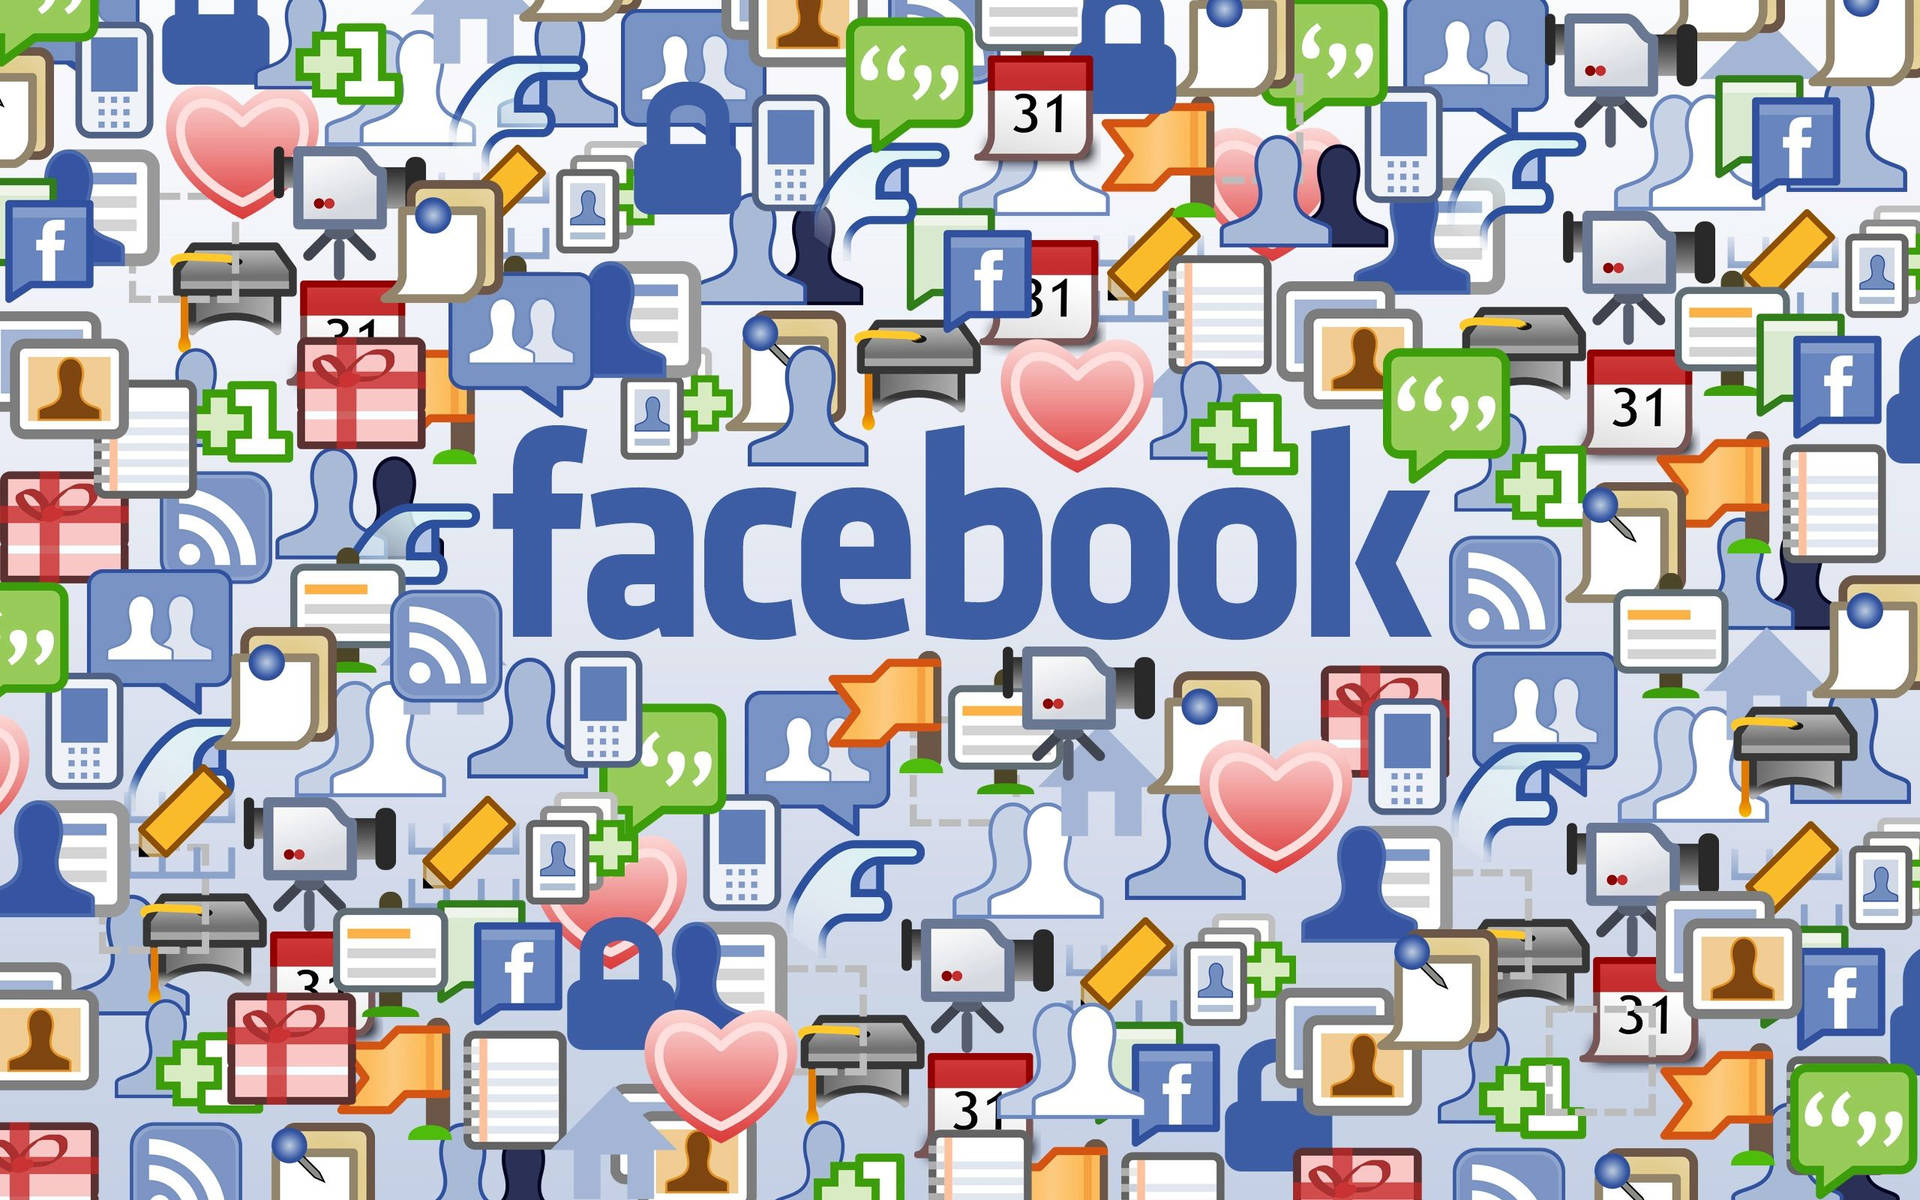 Free Facebook Wallpaper Downloads, [100+] Facebook Wallpapers for FREE |  